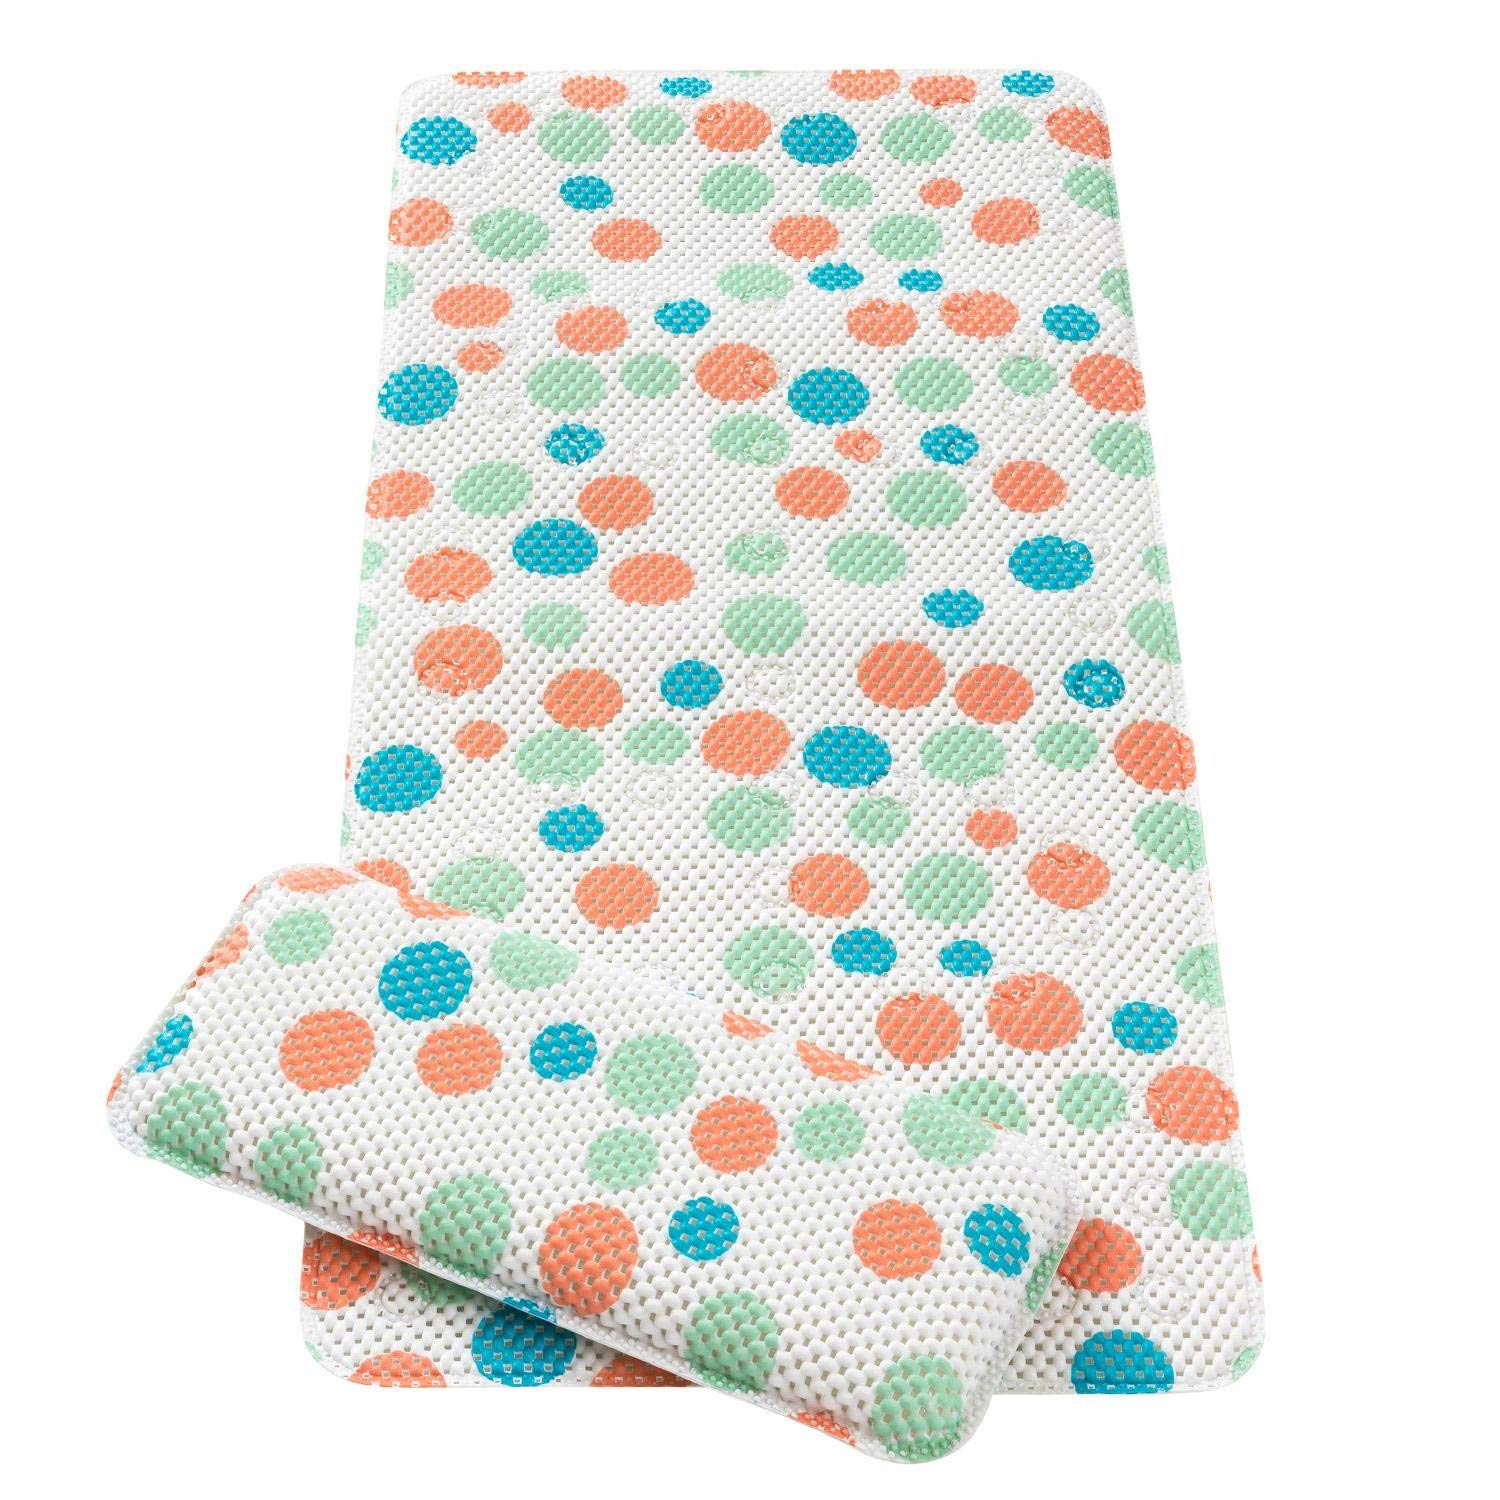 Clevamama 3529 Bath Mat with Knee Pad, Multi-Colour, 100 g